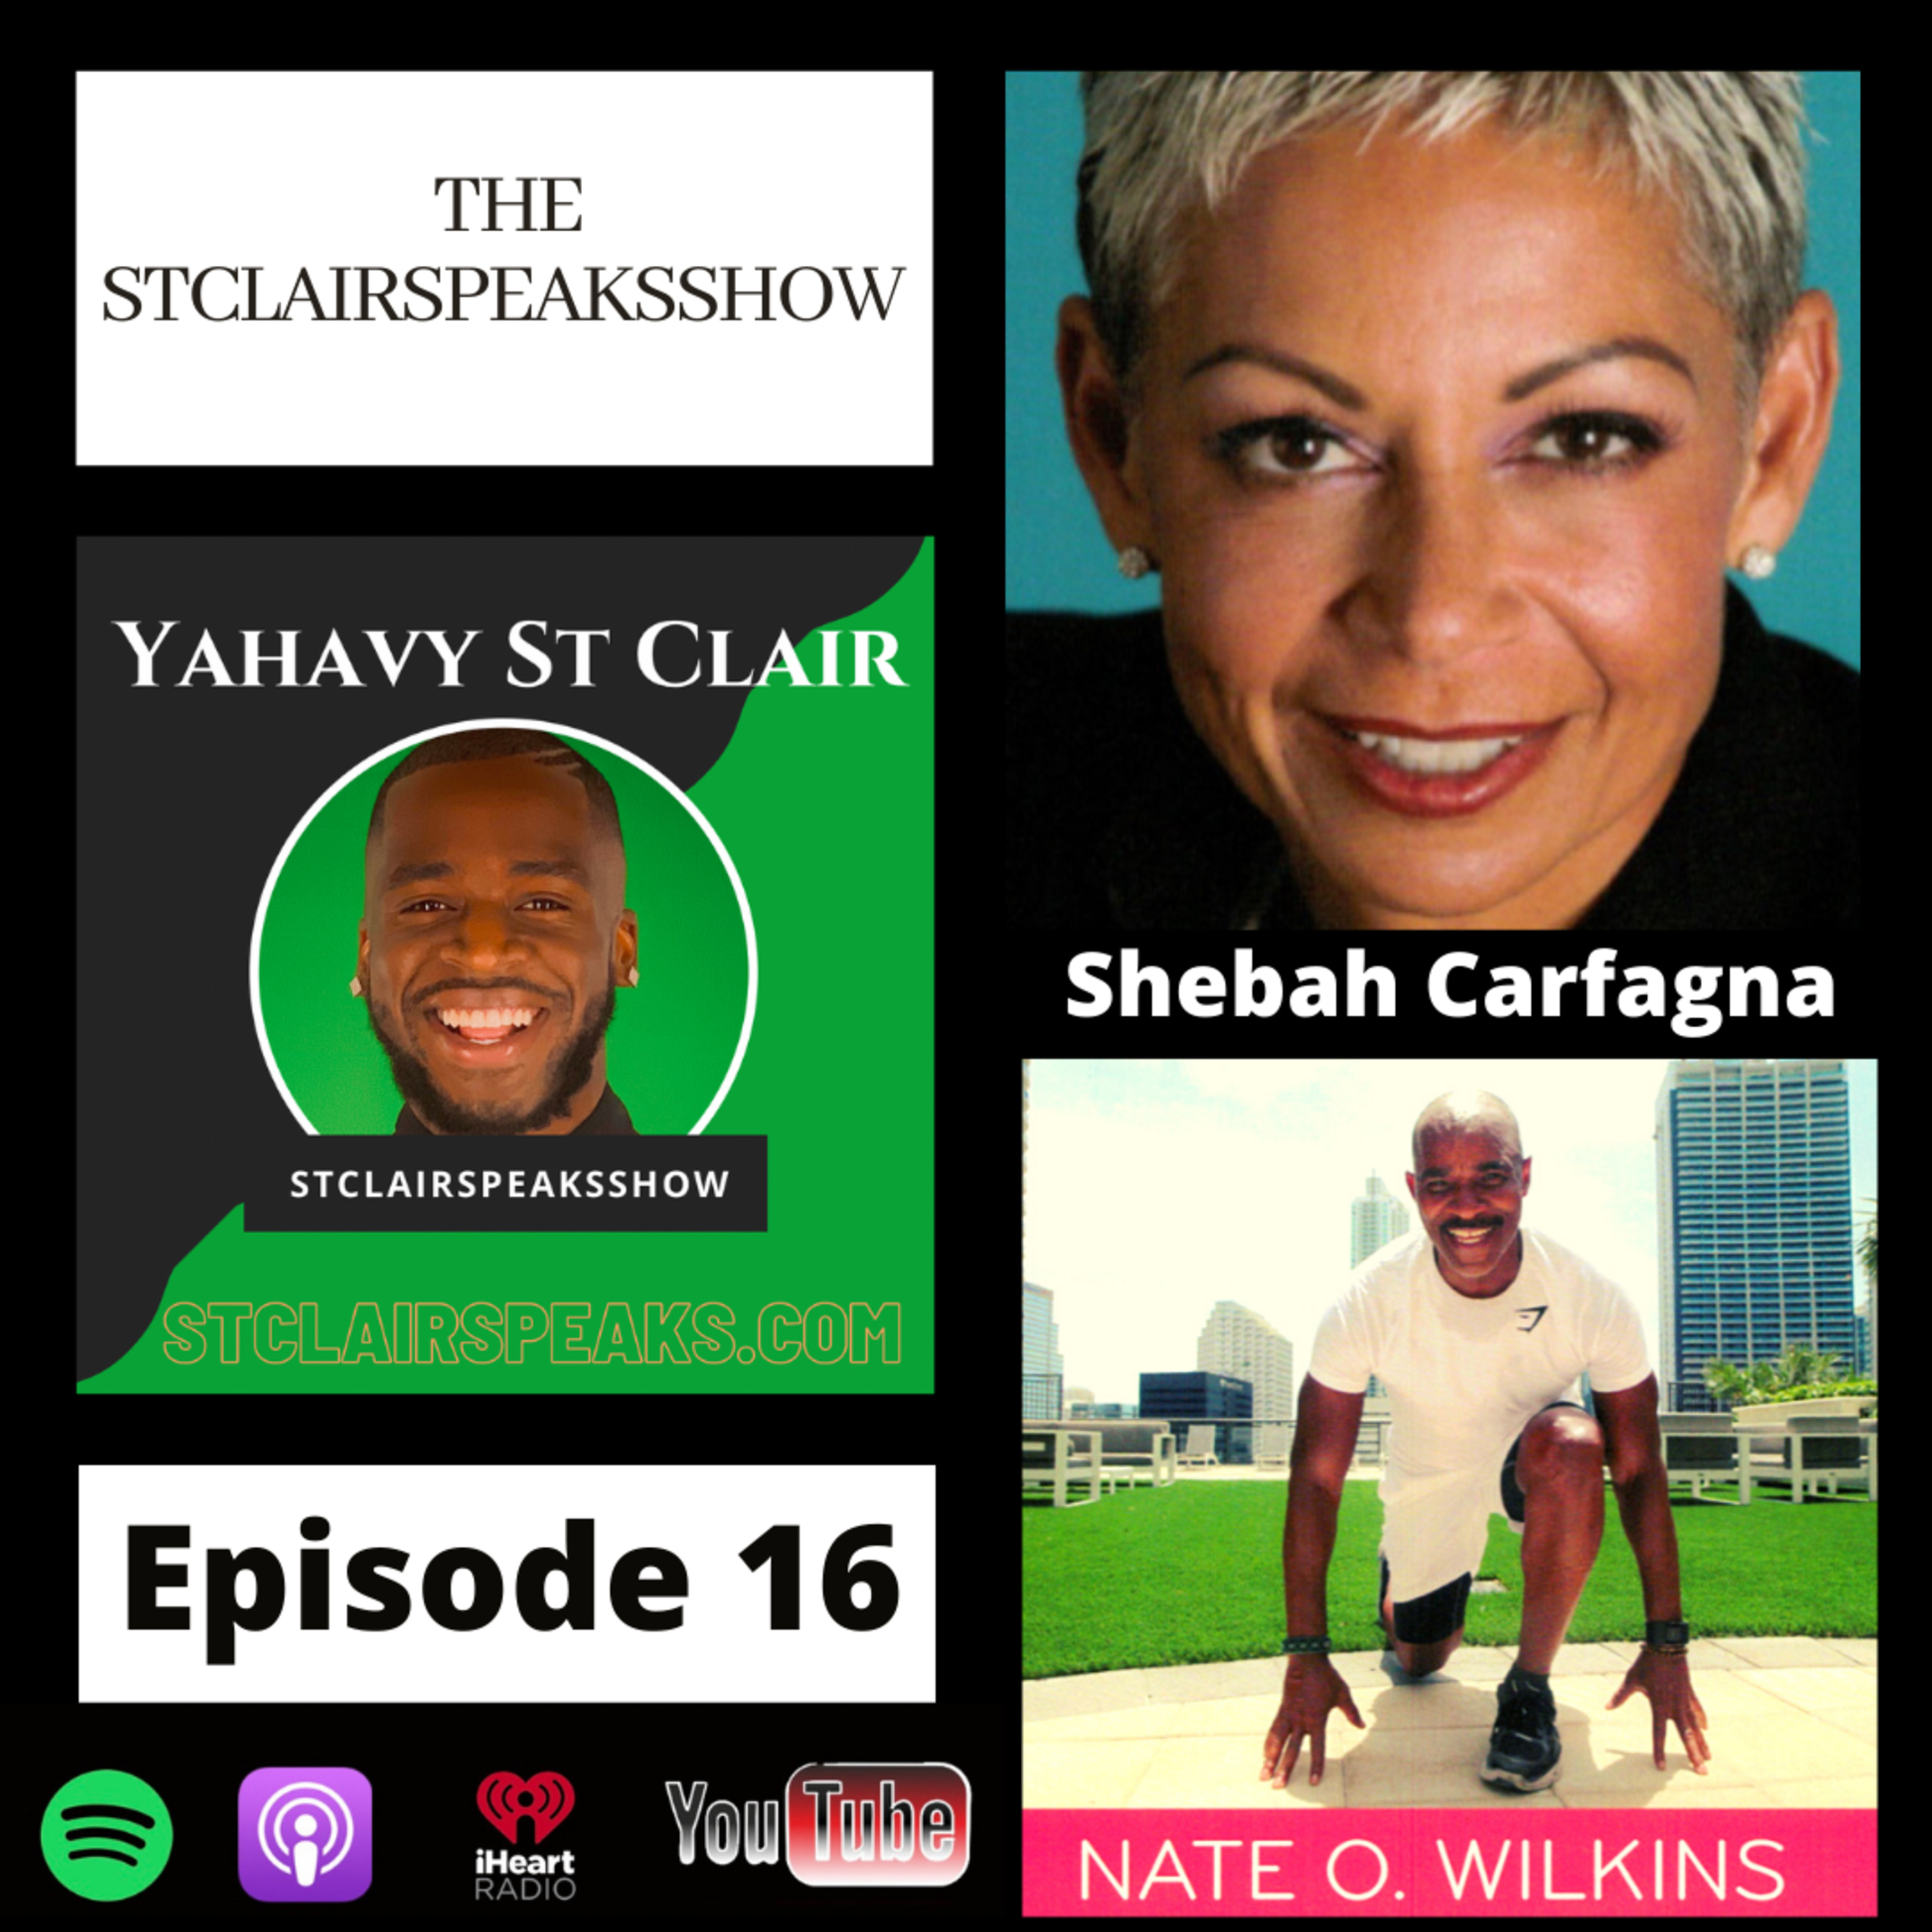 The StclairSpeaksShow Podcast Featuring Shebah Carfasgana & Nate Wilkins Wellness and Fitness Professionals Image